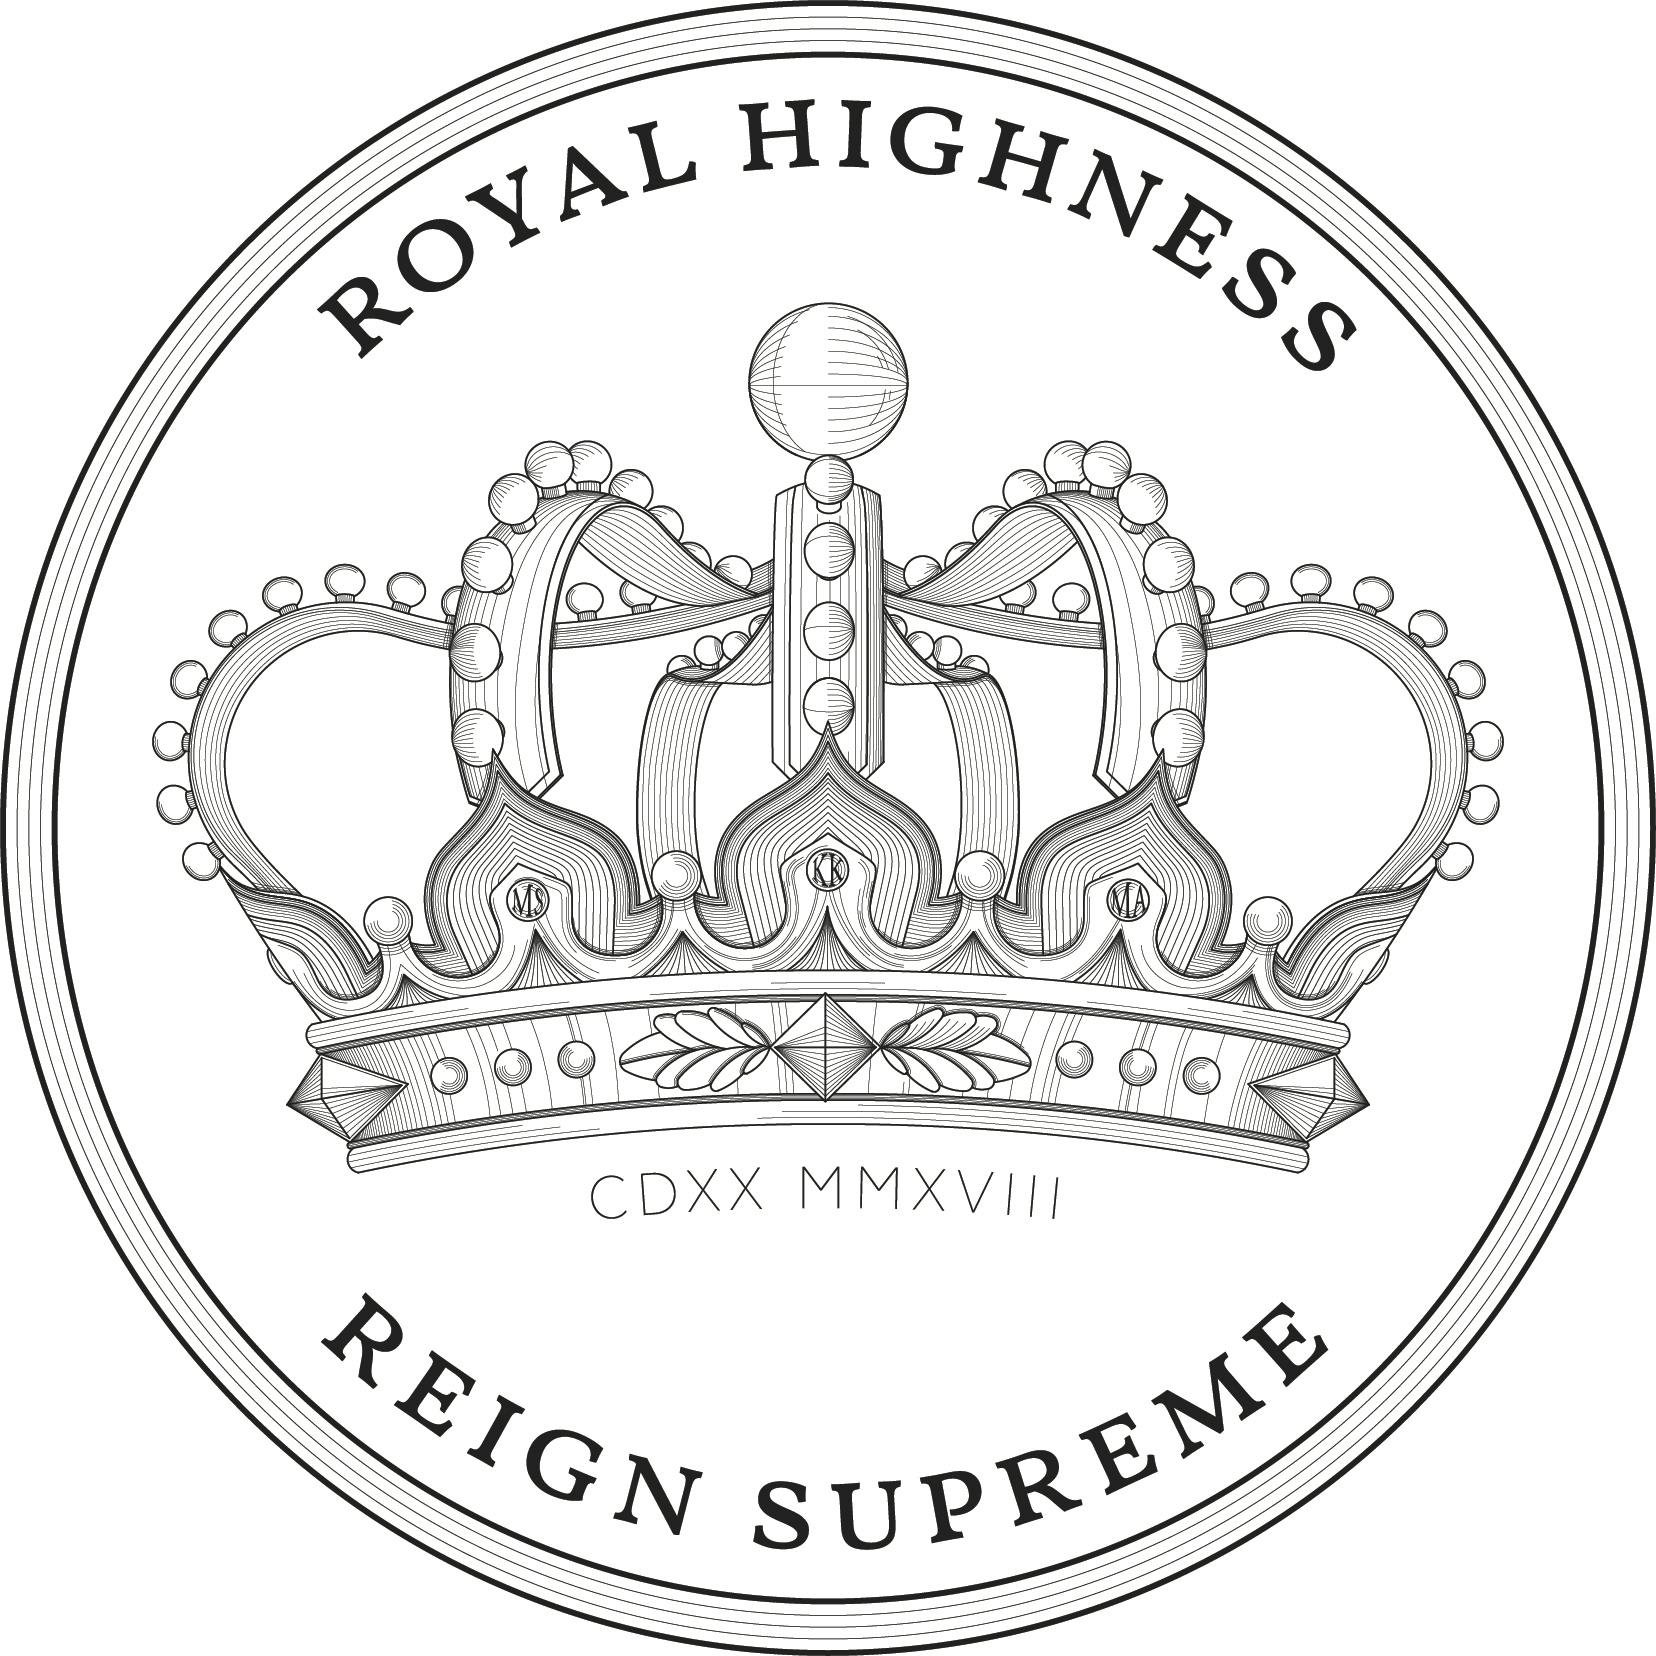 Royal Highness Cannabis Boutique